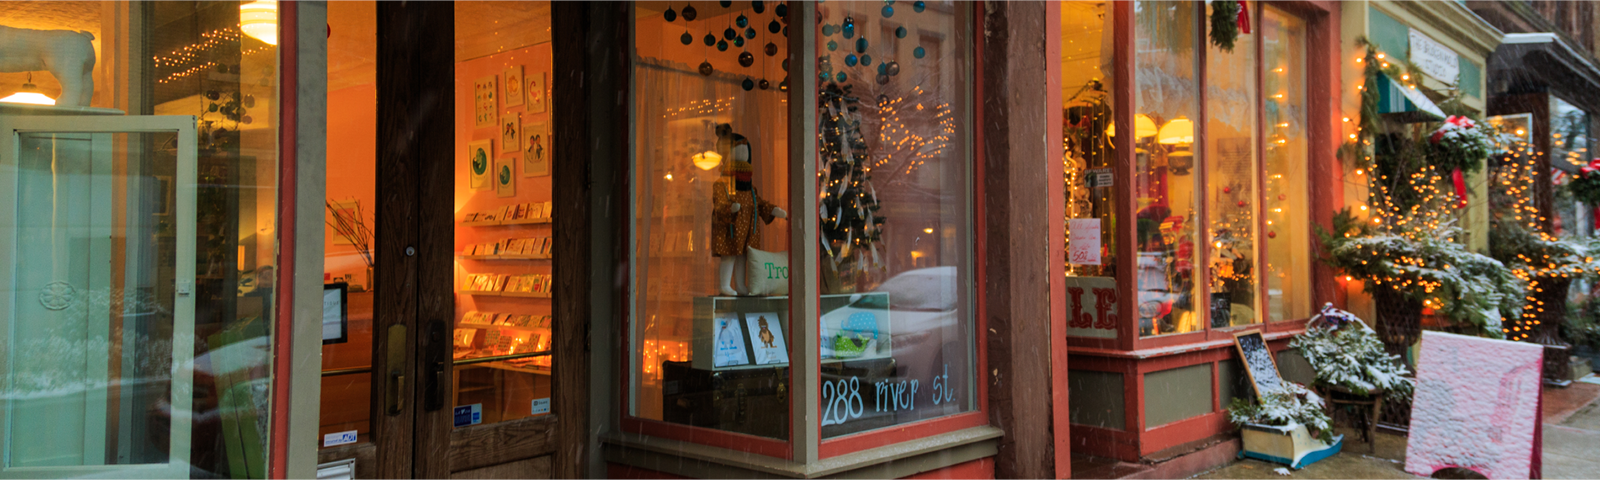 A photo of shops on a downtown street decorated for the holidays.